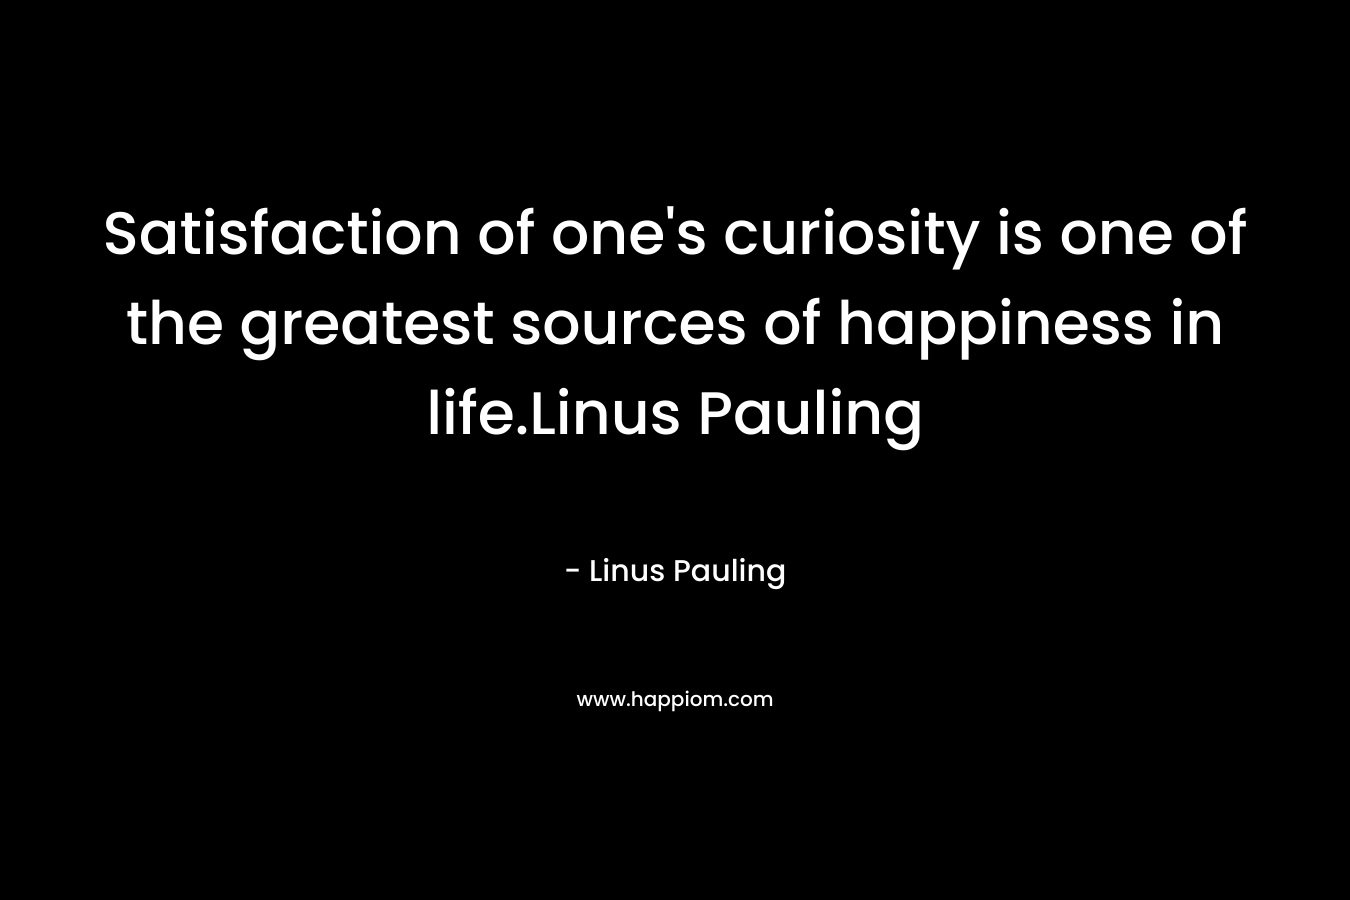 Satisfaction of one’s curiosity is one of the greatest sources of happiness in life.Linus Pauling – Linus Pauling